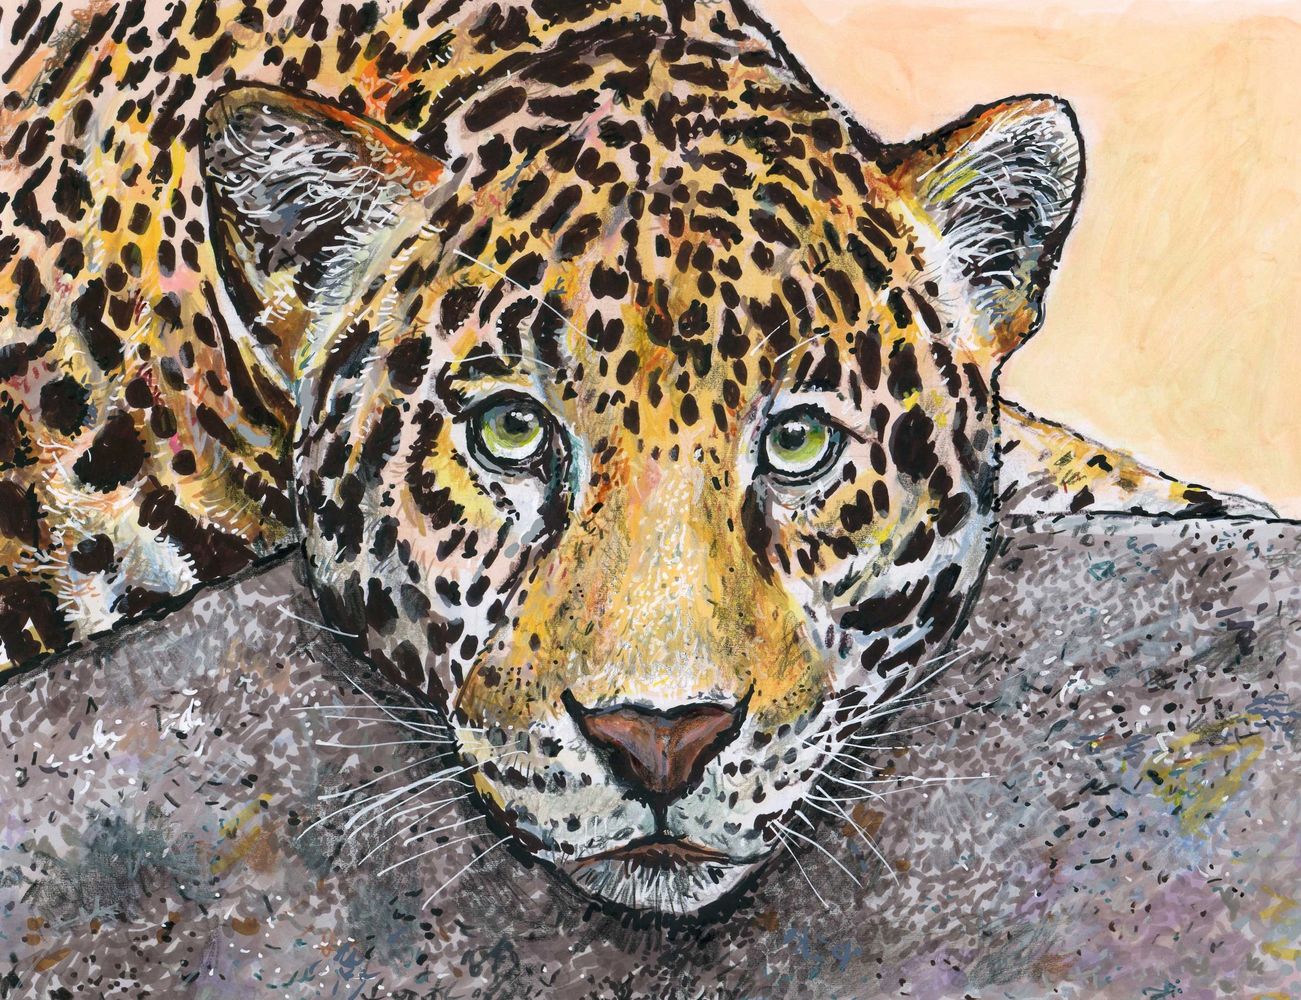 The pencil drawing of a leopard by John Petermeier is just one of 100s of art pieces John has create